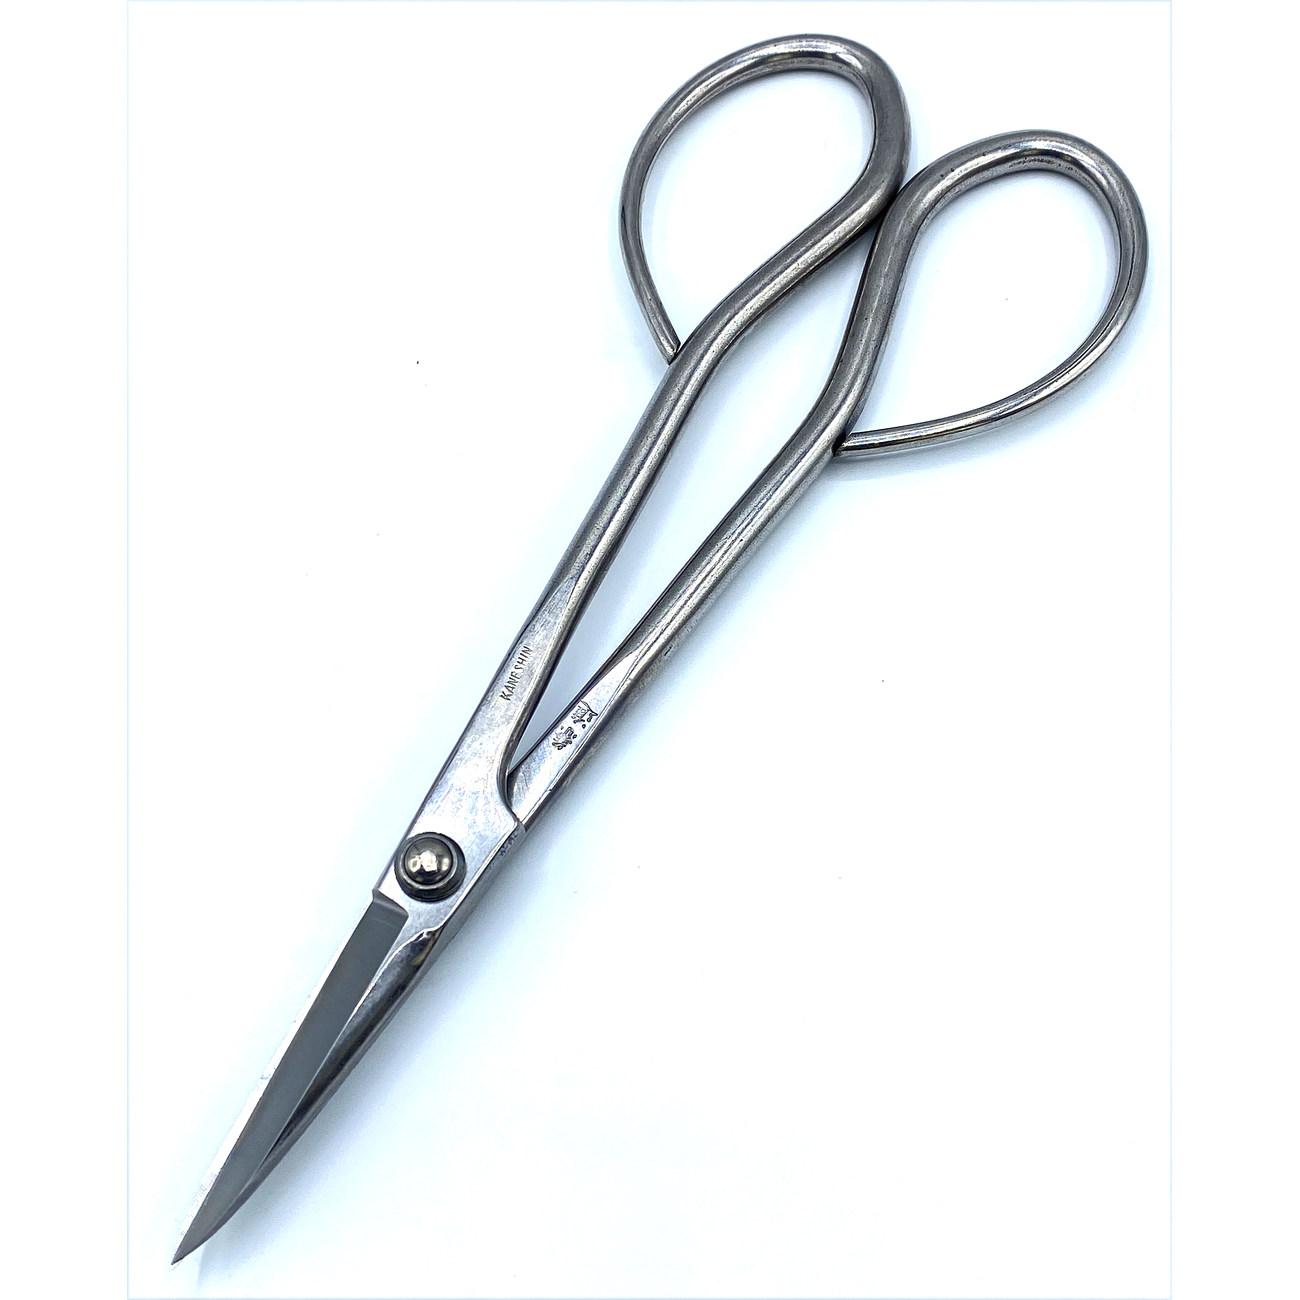 Kaneshin stainless trimming scissors KN841A 175 mm View 2